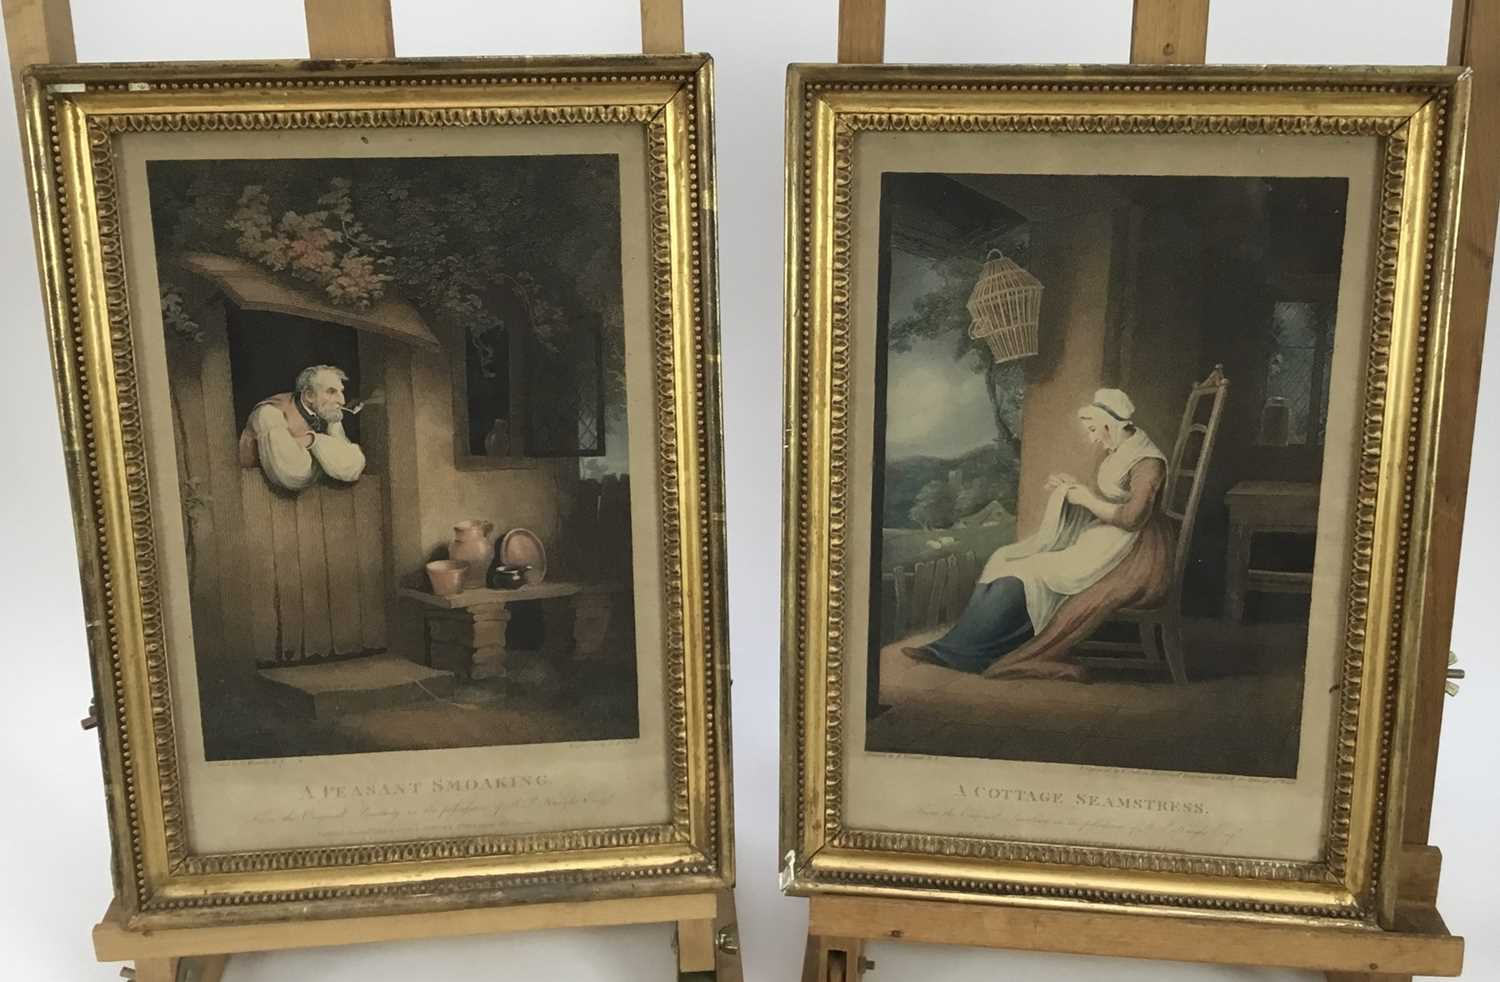 Lot 128 - A pair of hand coloured 19th century stipple engravings - 'A Peasant Smoking' and 'A Cottage Seamstress', pub. London 1802 Clay & Scriven, both images 20cm x 28cm, in glazed frames (2)